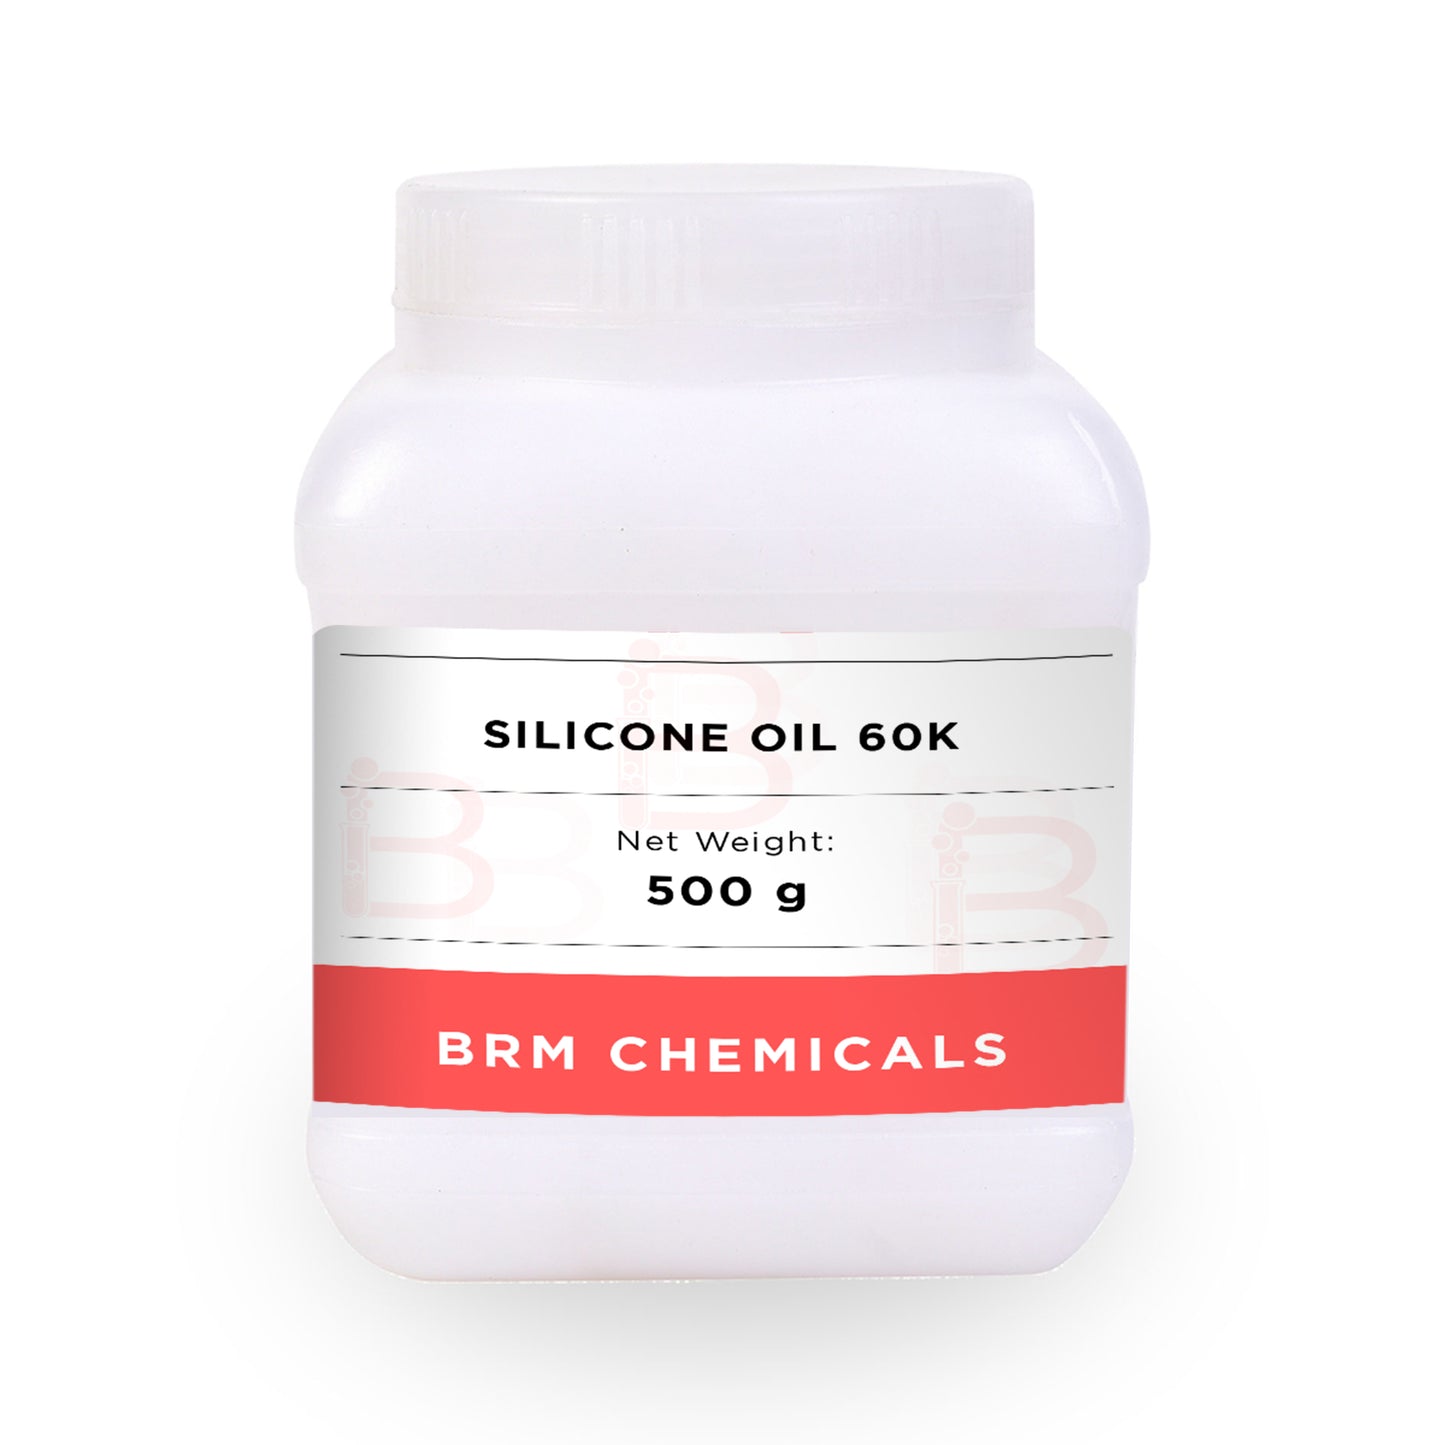 Silicone Oil 60K Cst